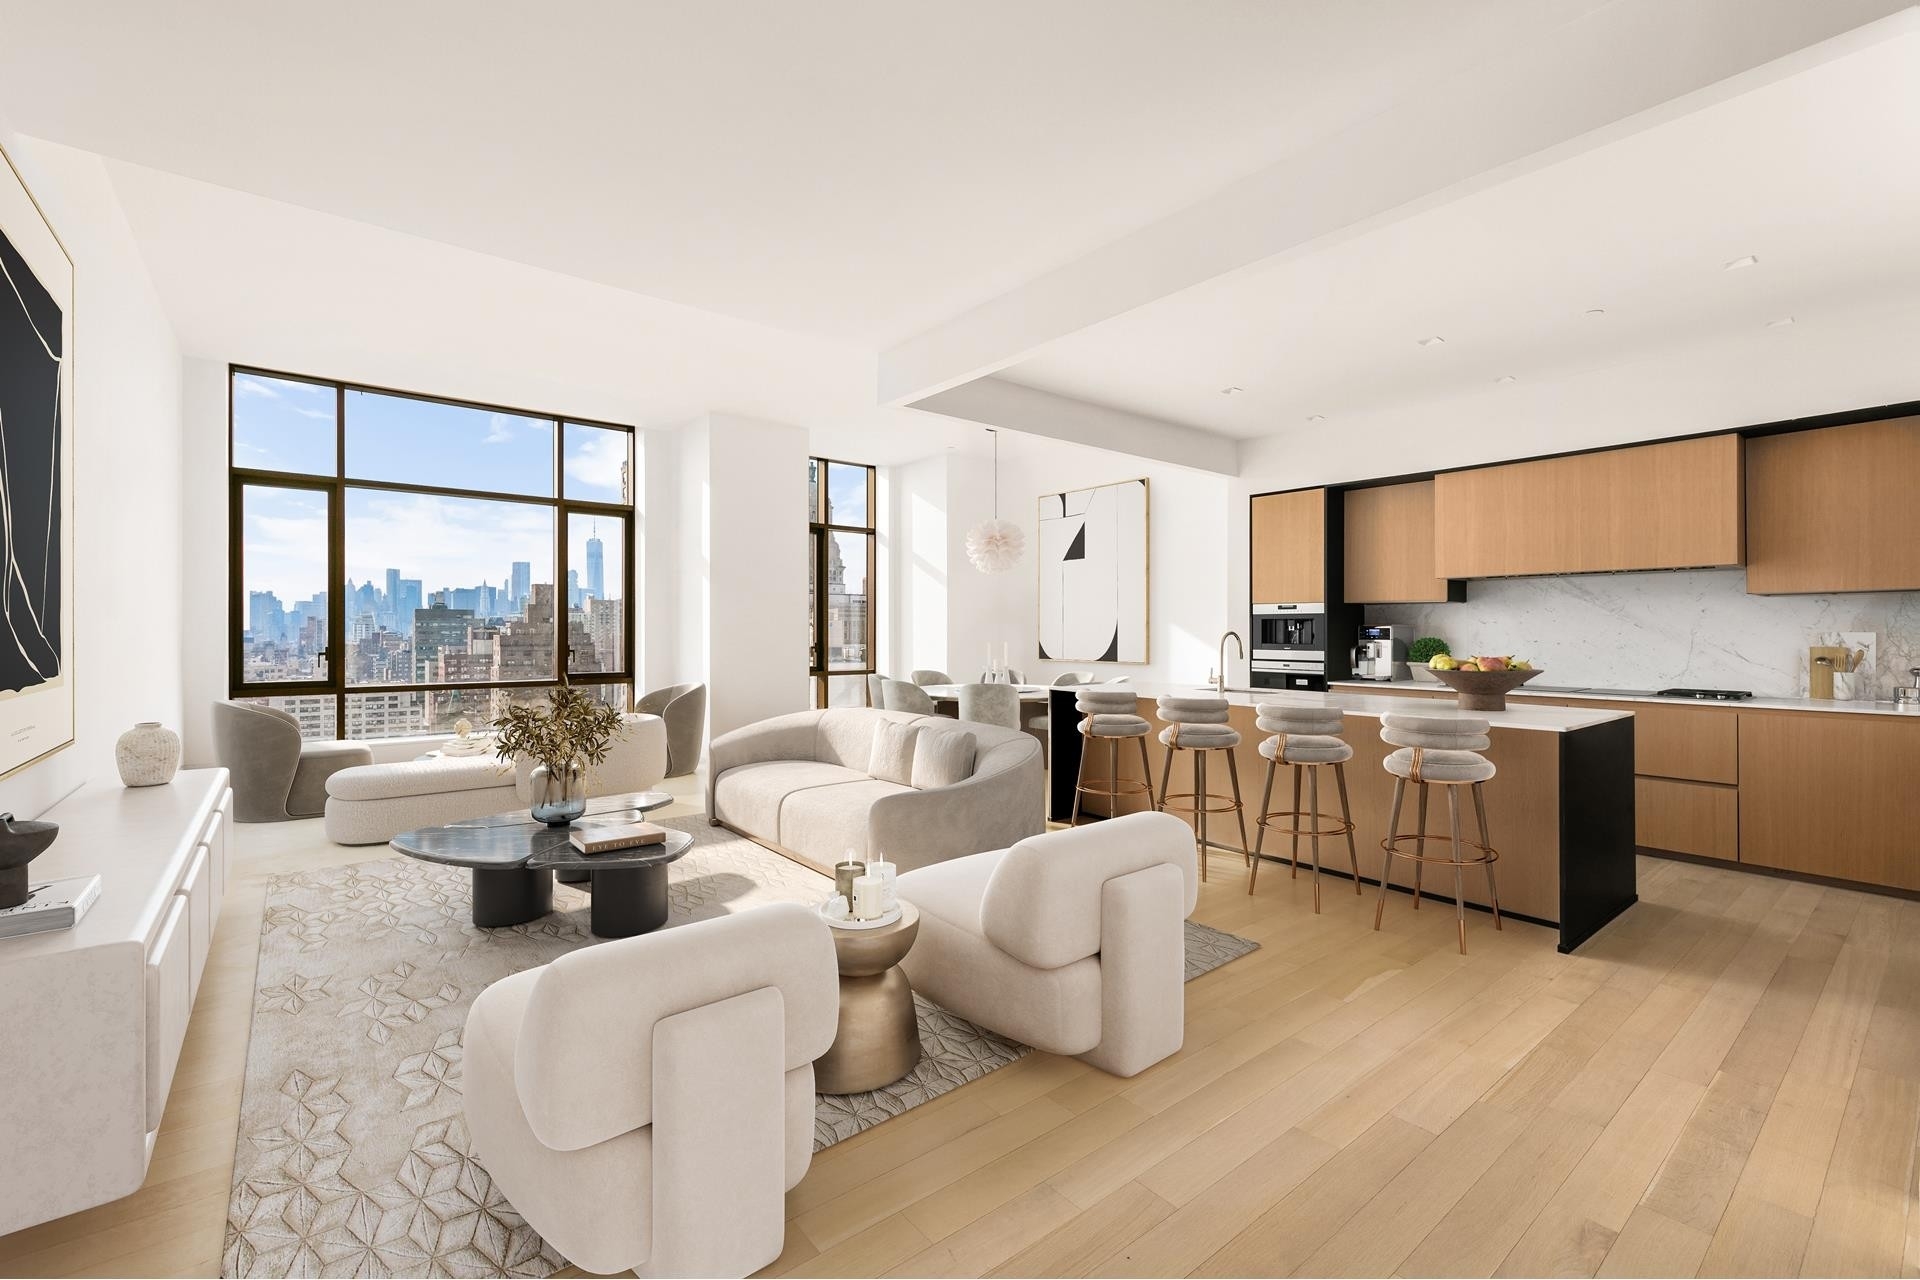 Property at Gramercy Square, 215 E 19TH ST, 17A Gramercy Park, New York, New York 10003